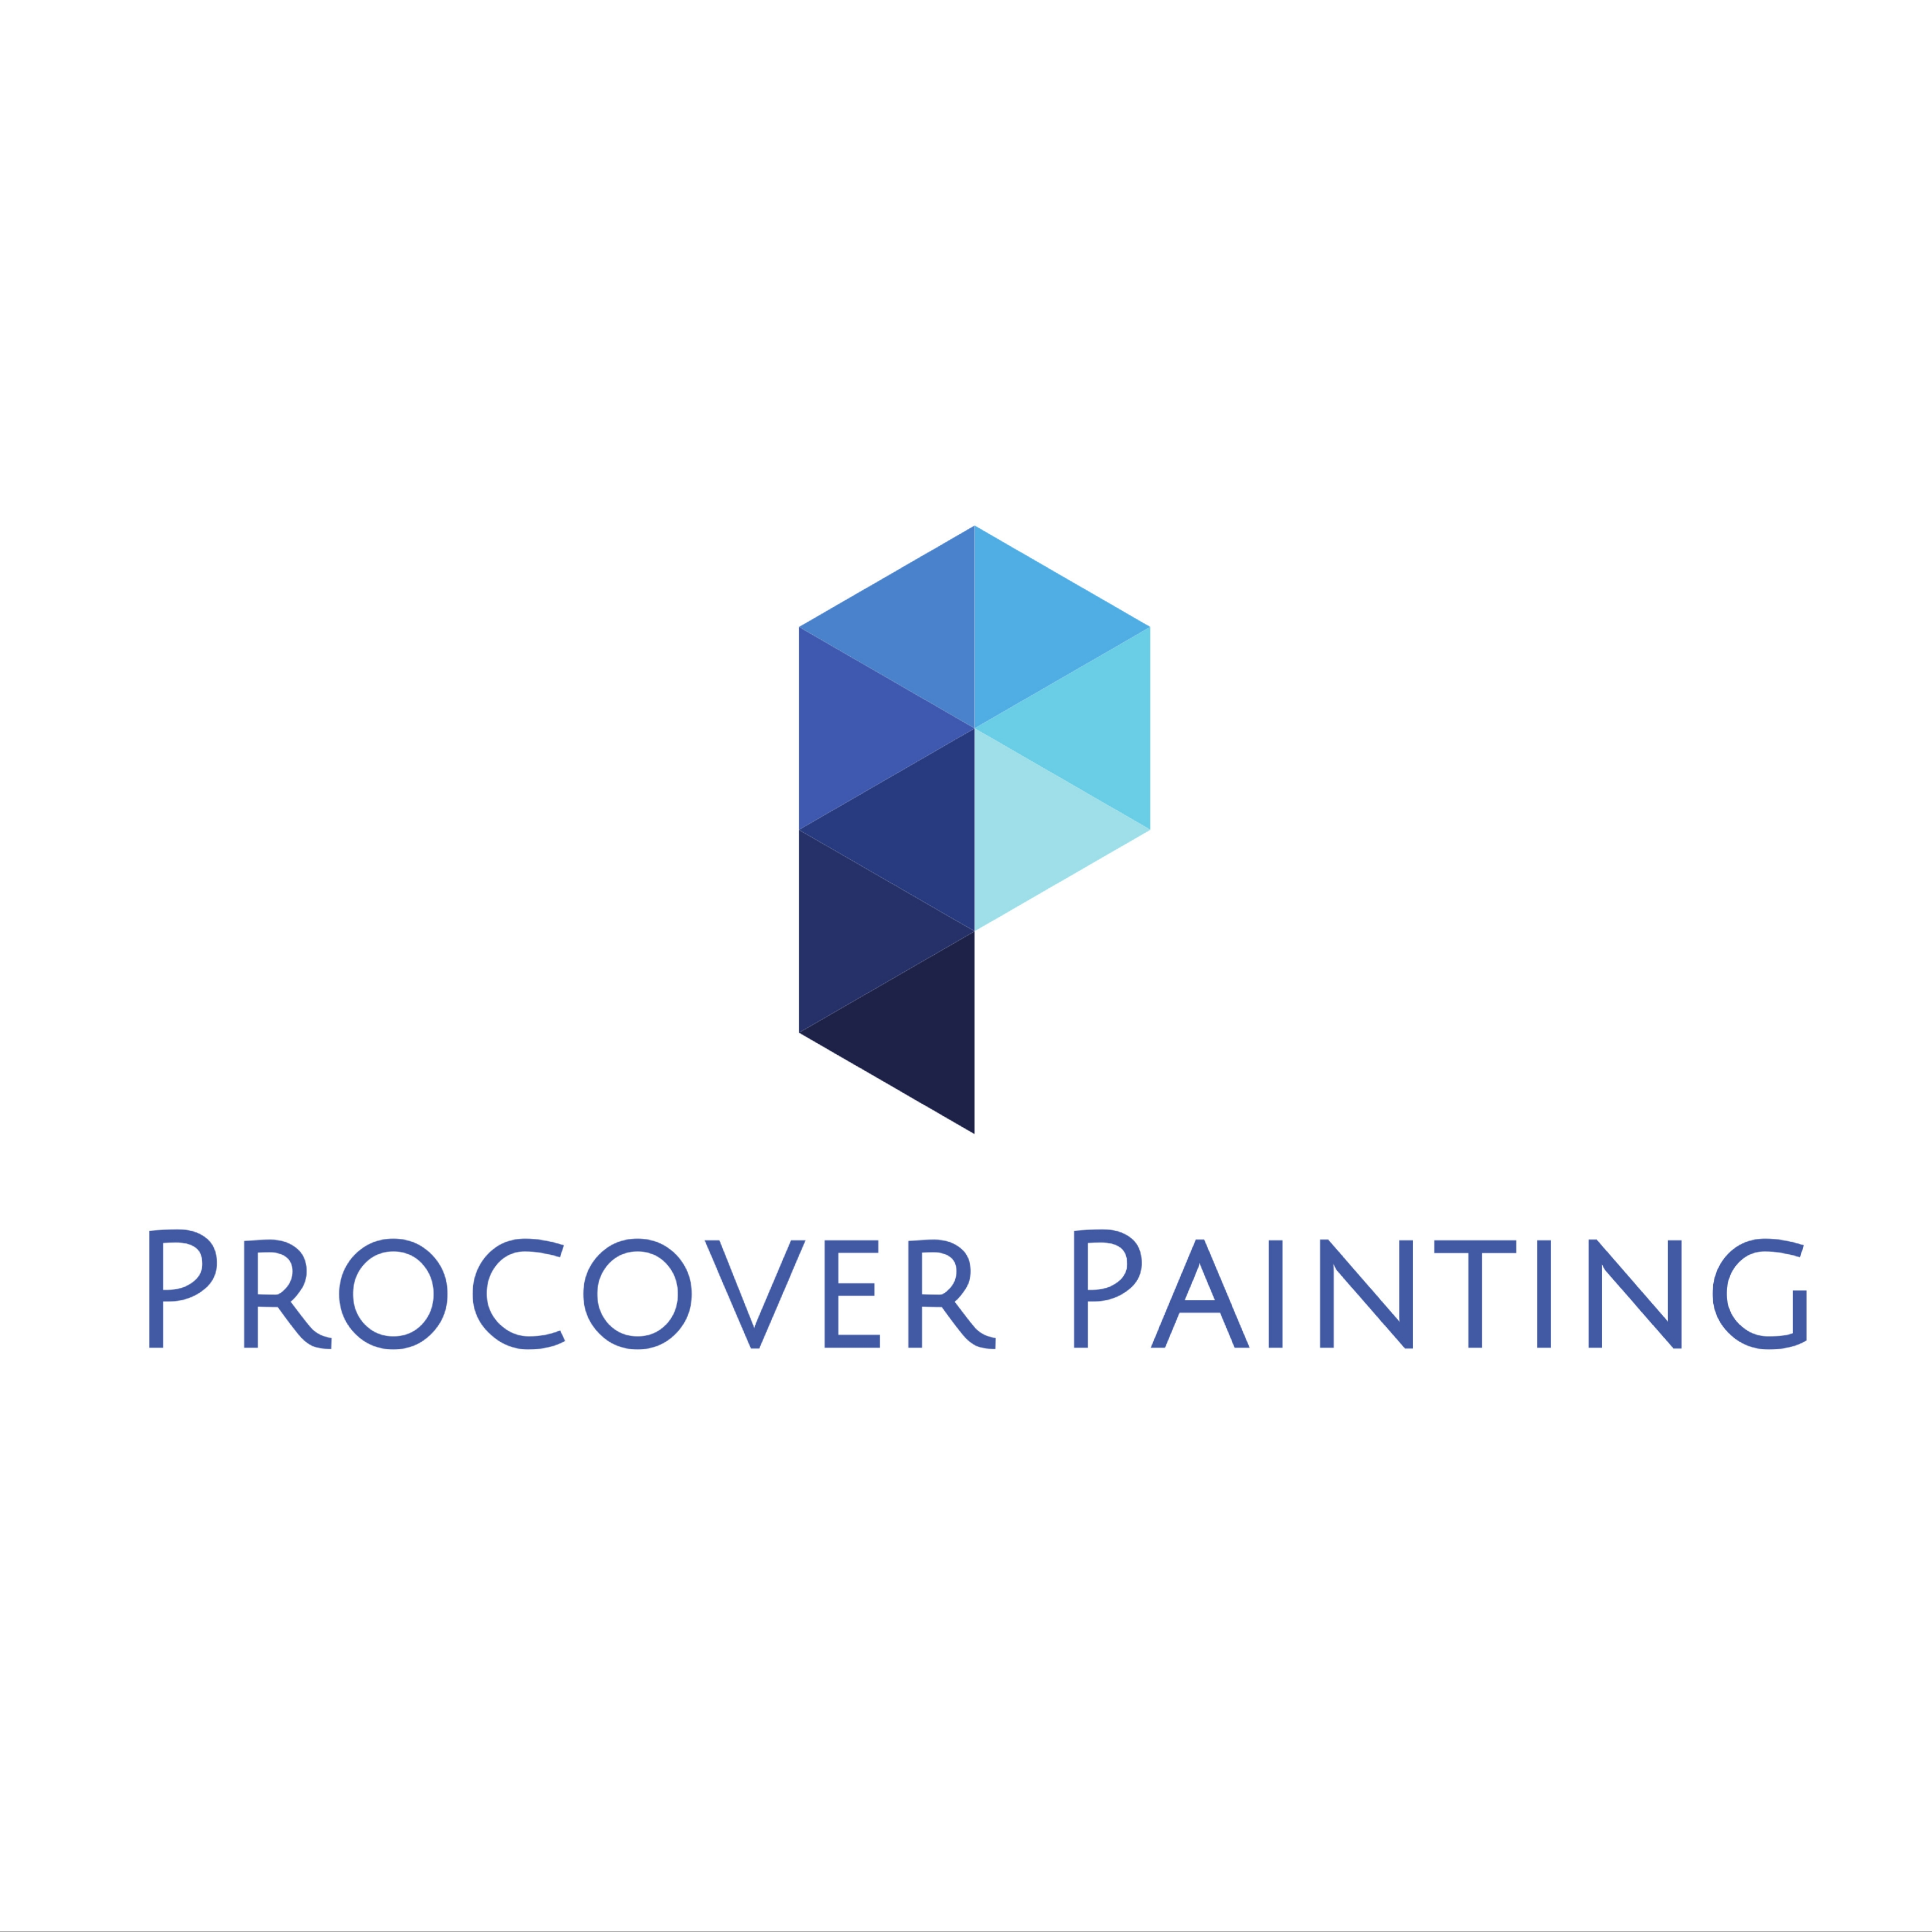 Procover Painting